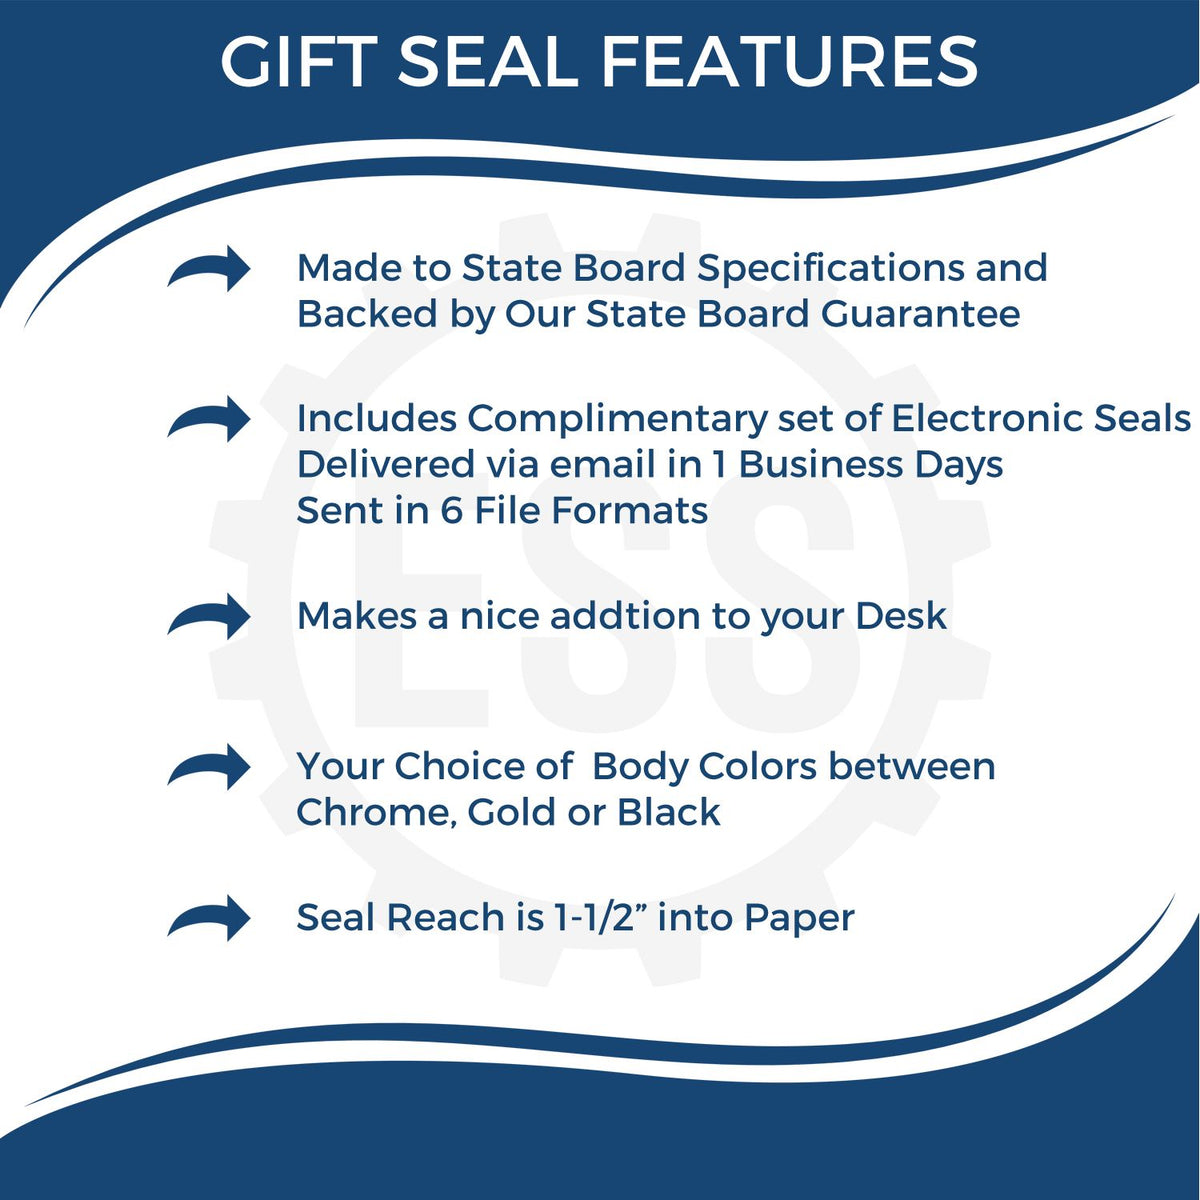 A picture of an infographic highlighting the selling points for the Gift Massachusetts Engineer Seal